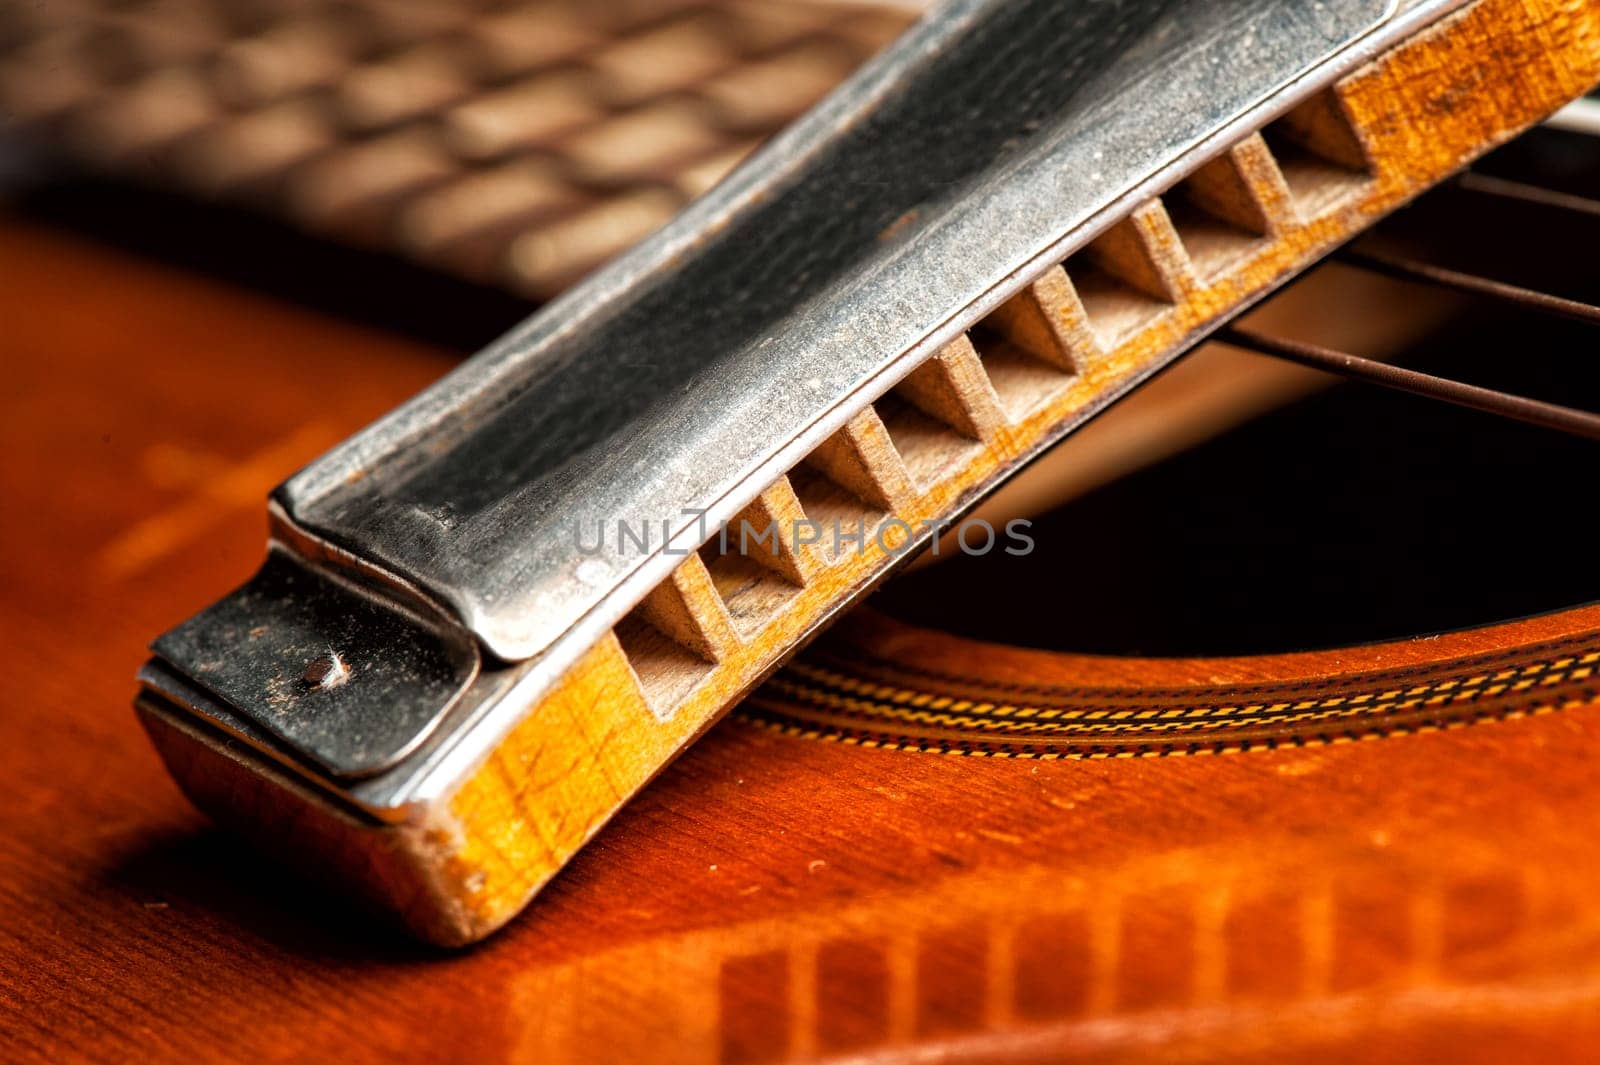 vintage wooden harmonica lying on an old acoustic guitar.